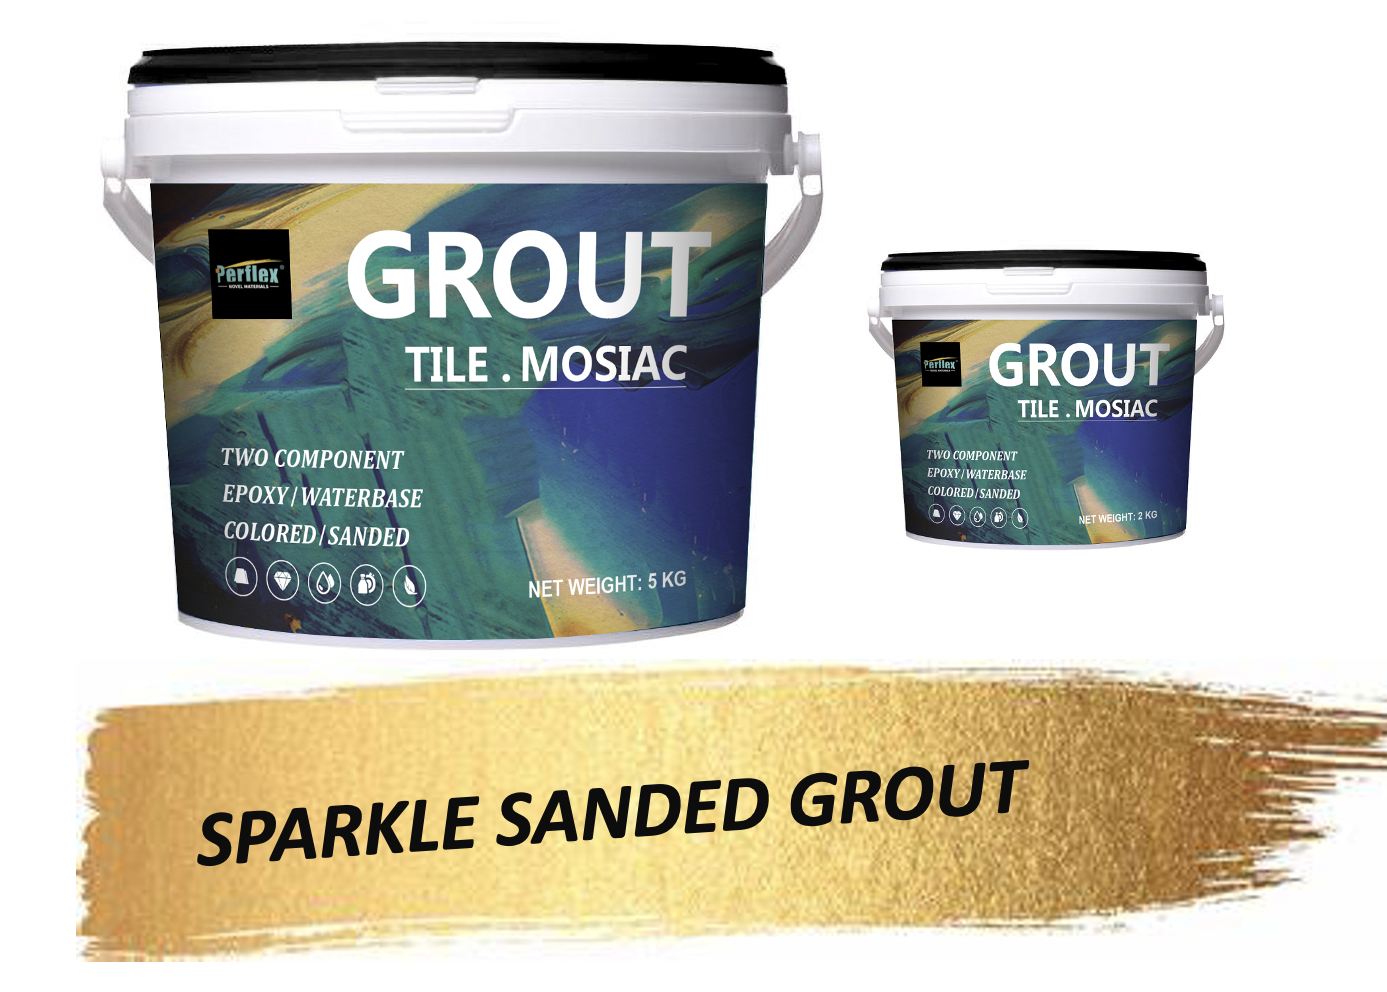 Cementitious Epoxy Mortar Grout For Mosaic Tile Stain Resistance, Anti-Mould, Easy To Clean, Colored, Waterproof 0